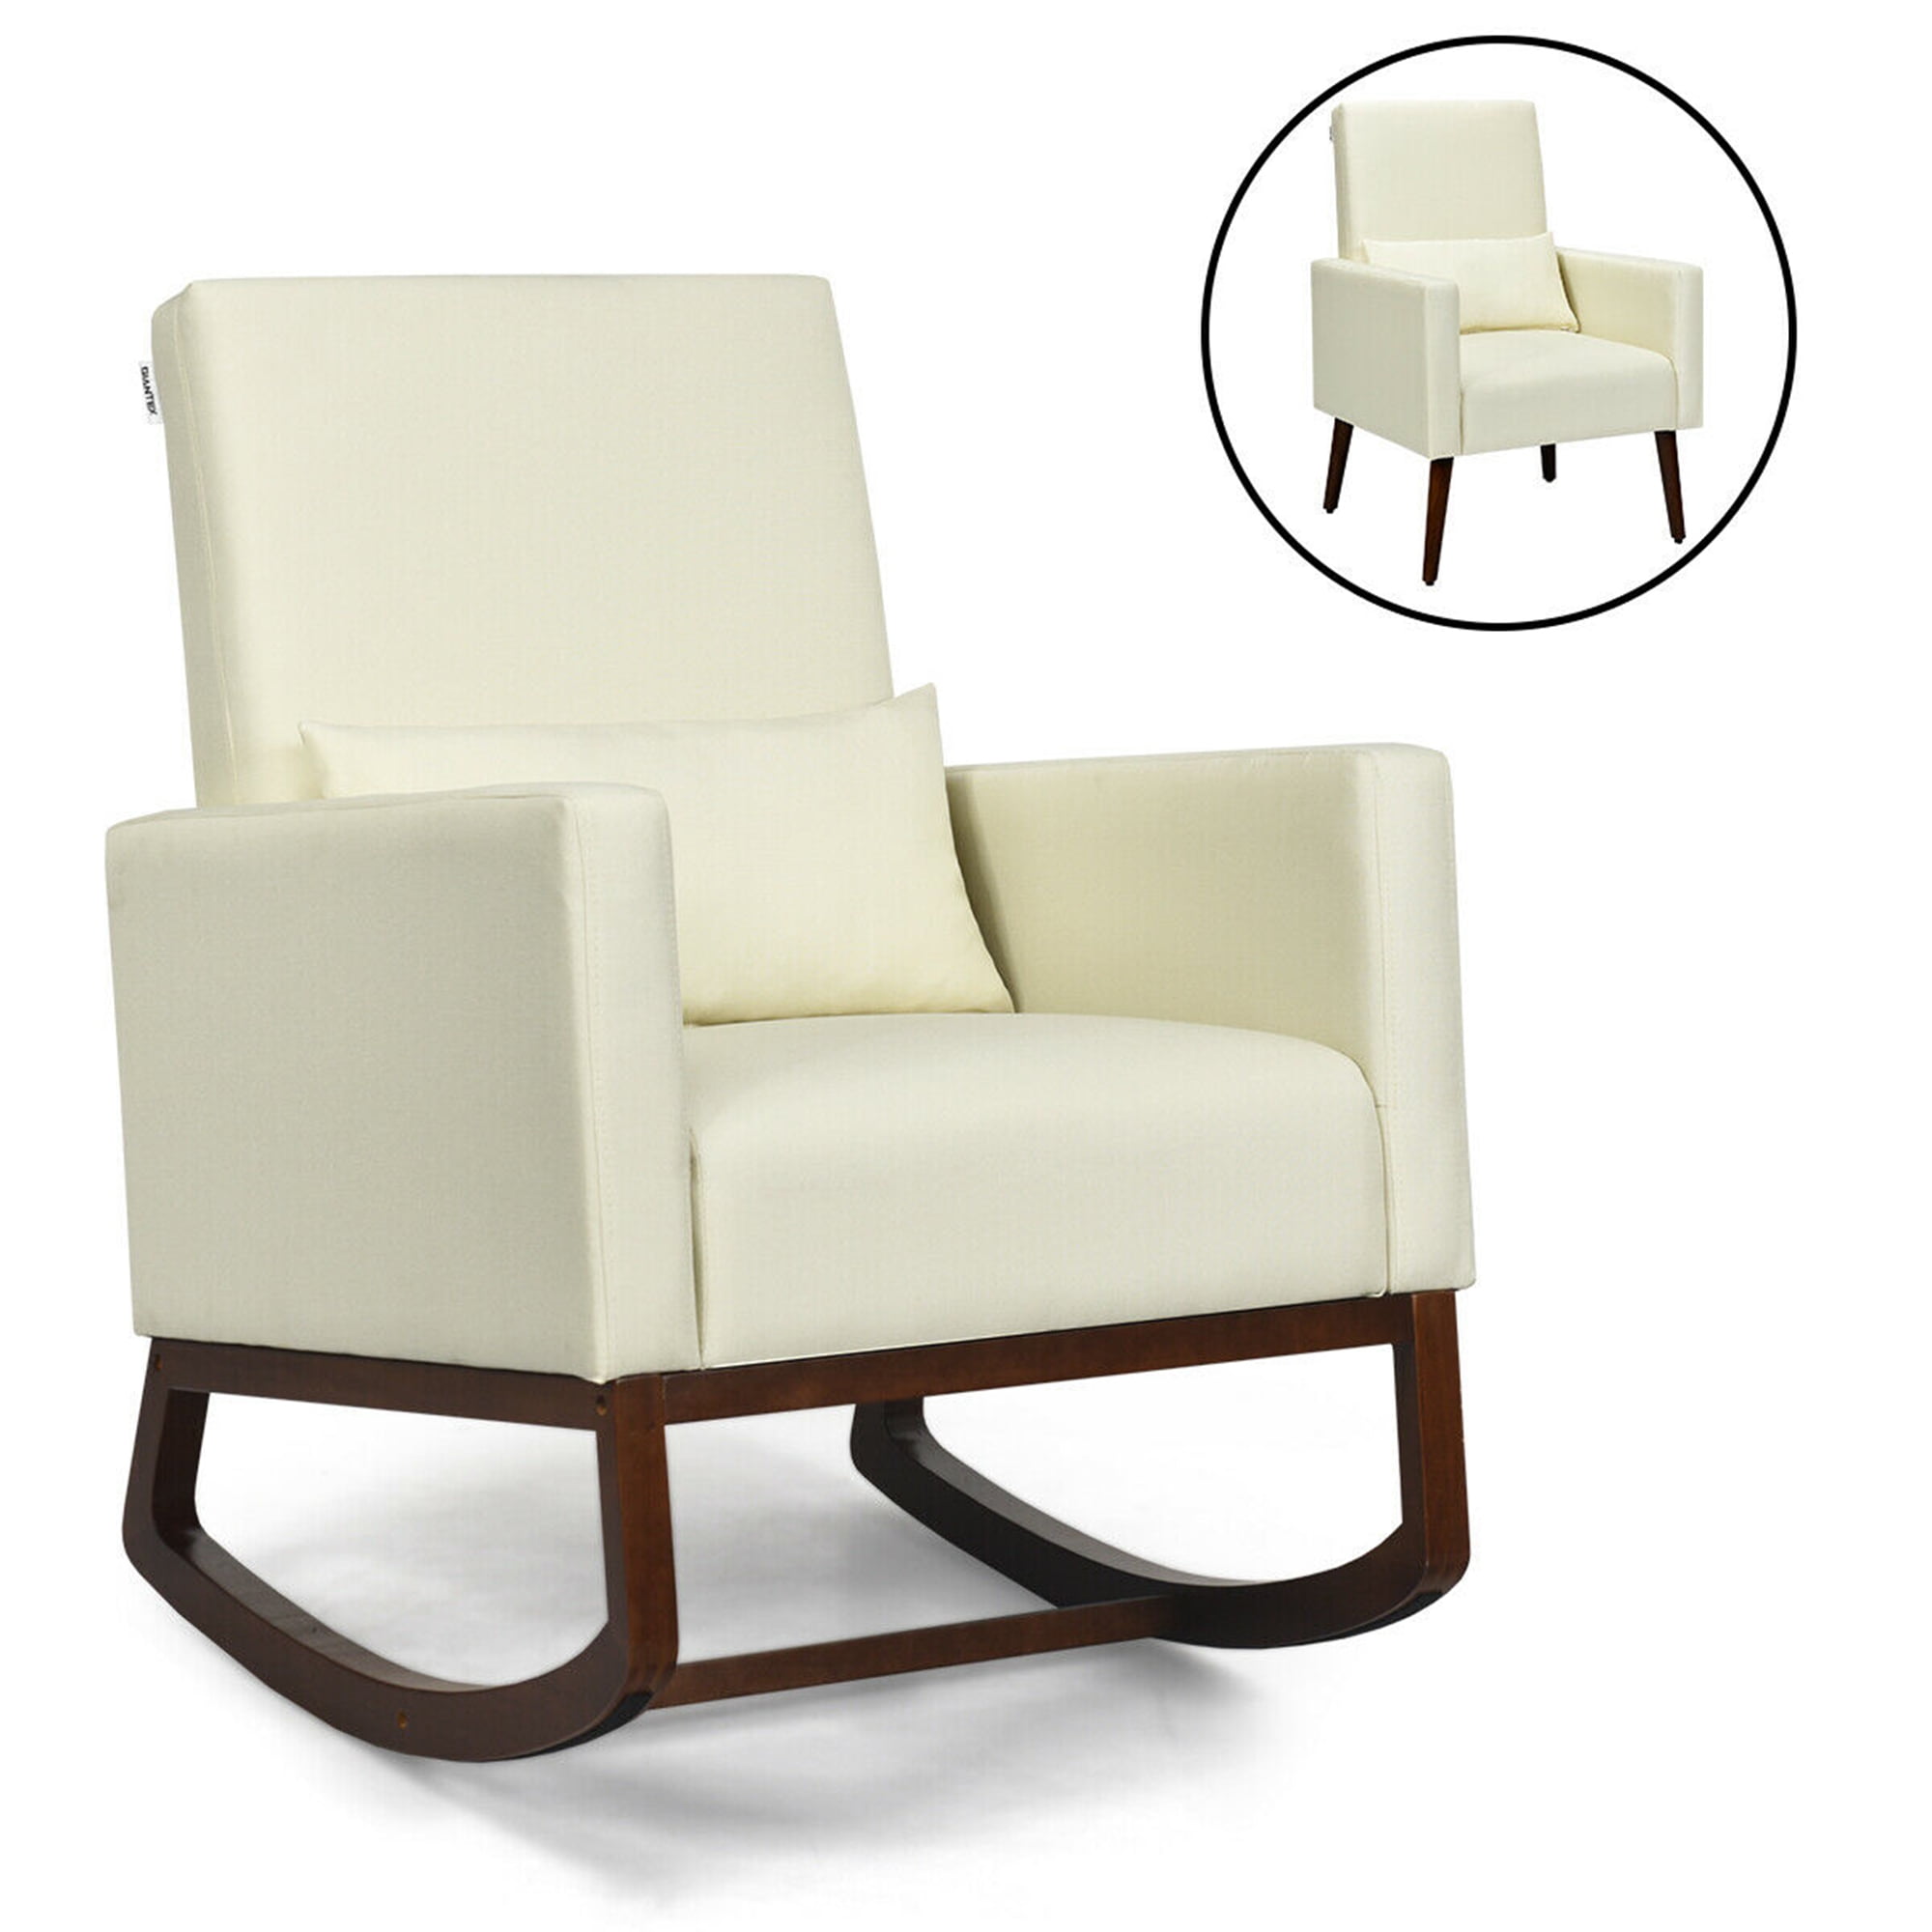 Gymax 2-in-1 Fabric Upholstered Rocking Chair Nursery ...